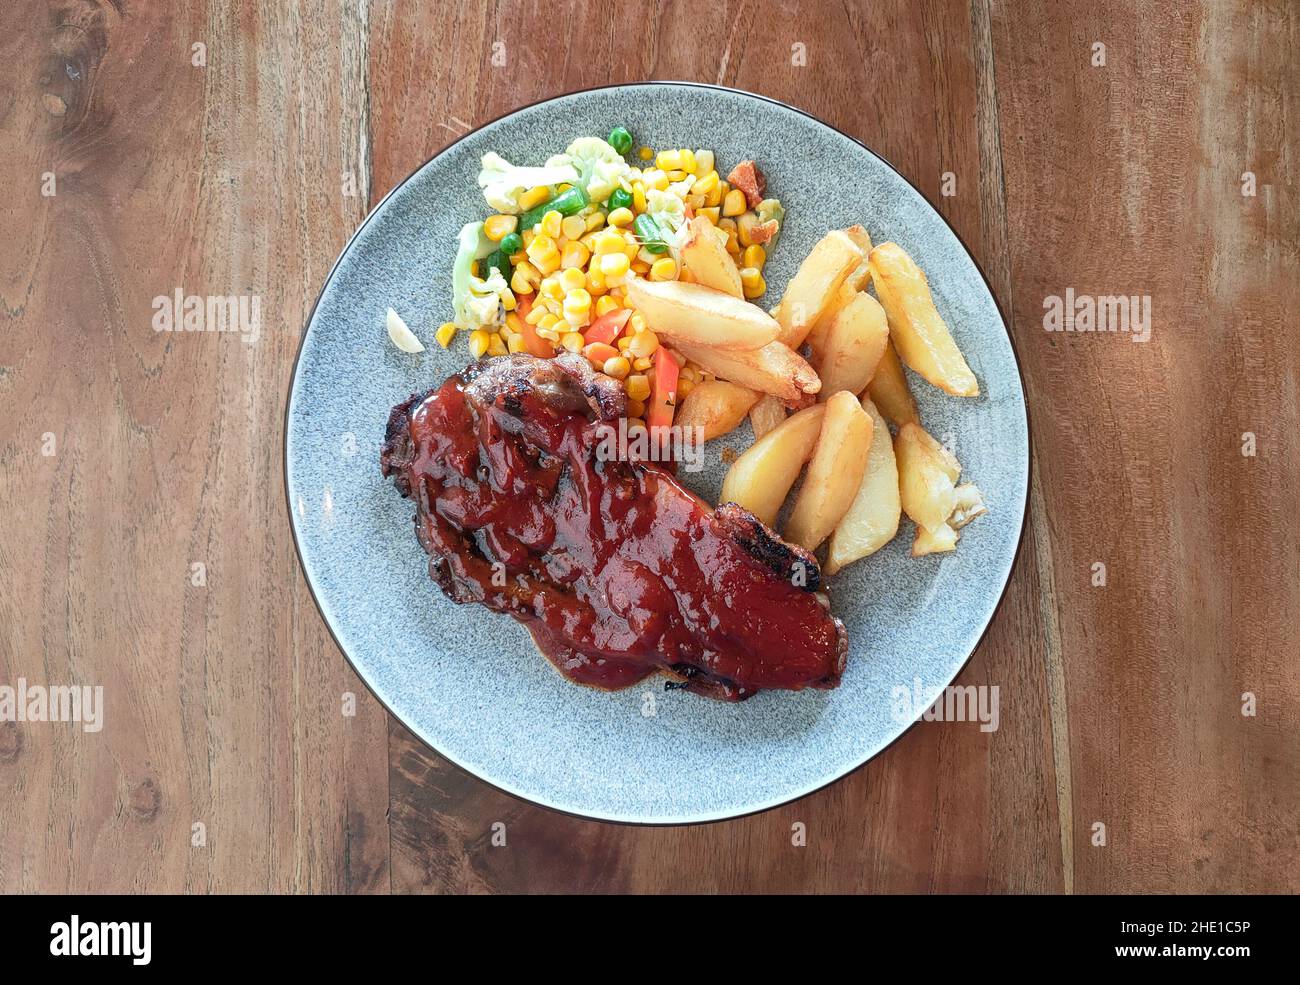 Sirloin steak with french fries. Top view Stock Photo